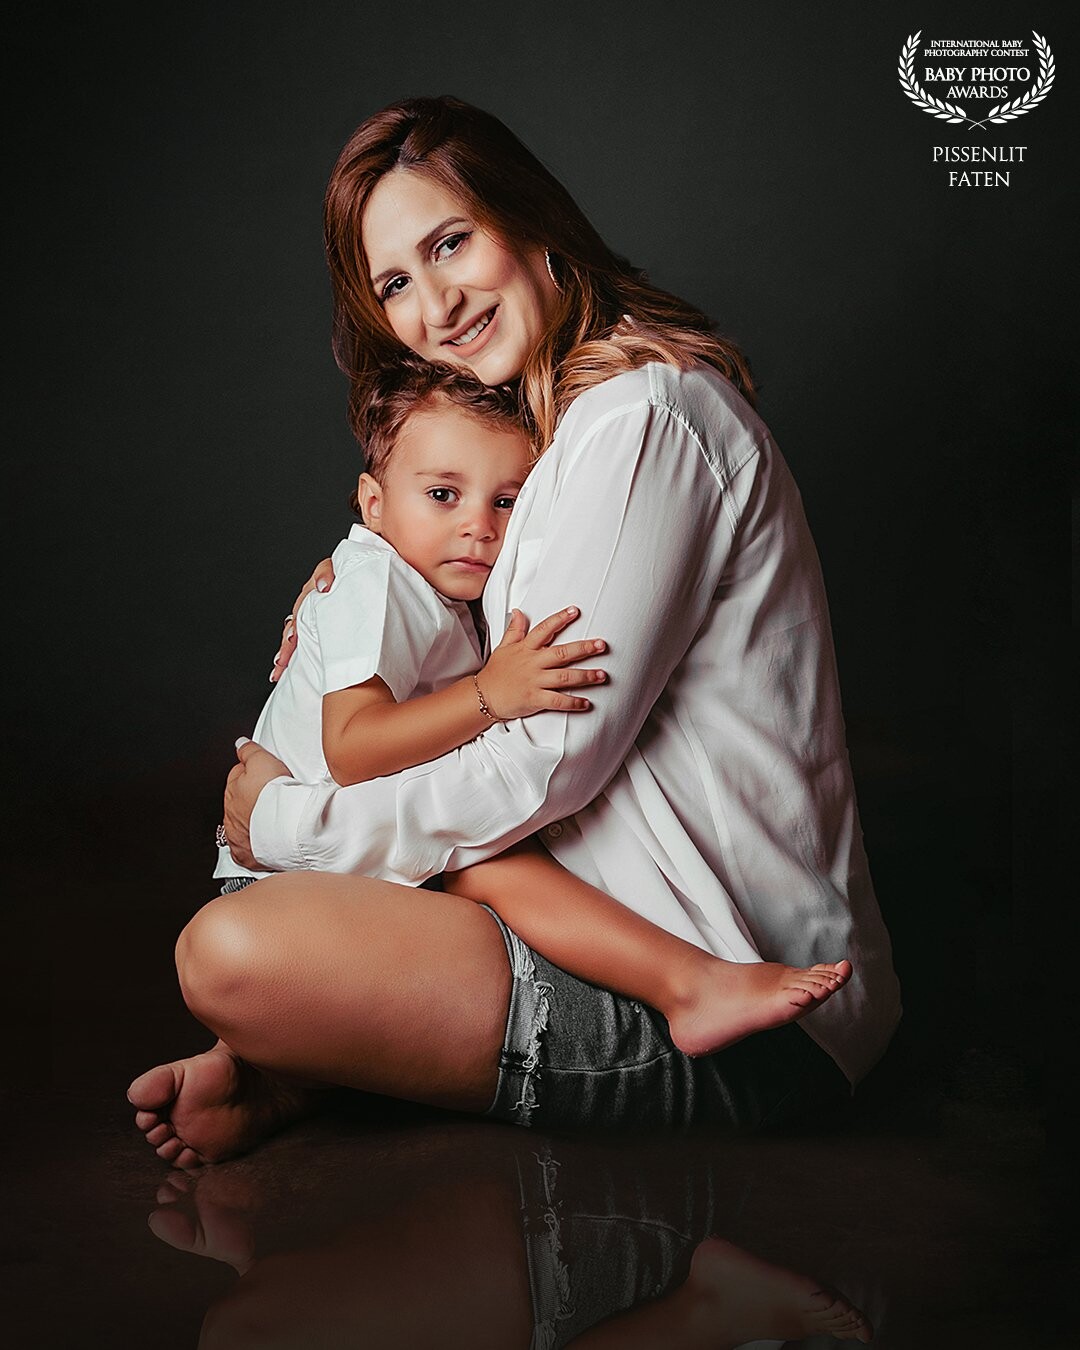 The best refuge of a child is the arms of his mum.<br />
We can feel how strong and how deep <br />
is the connexion between them in my photo.